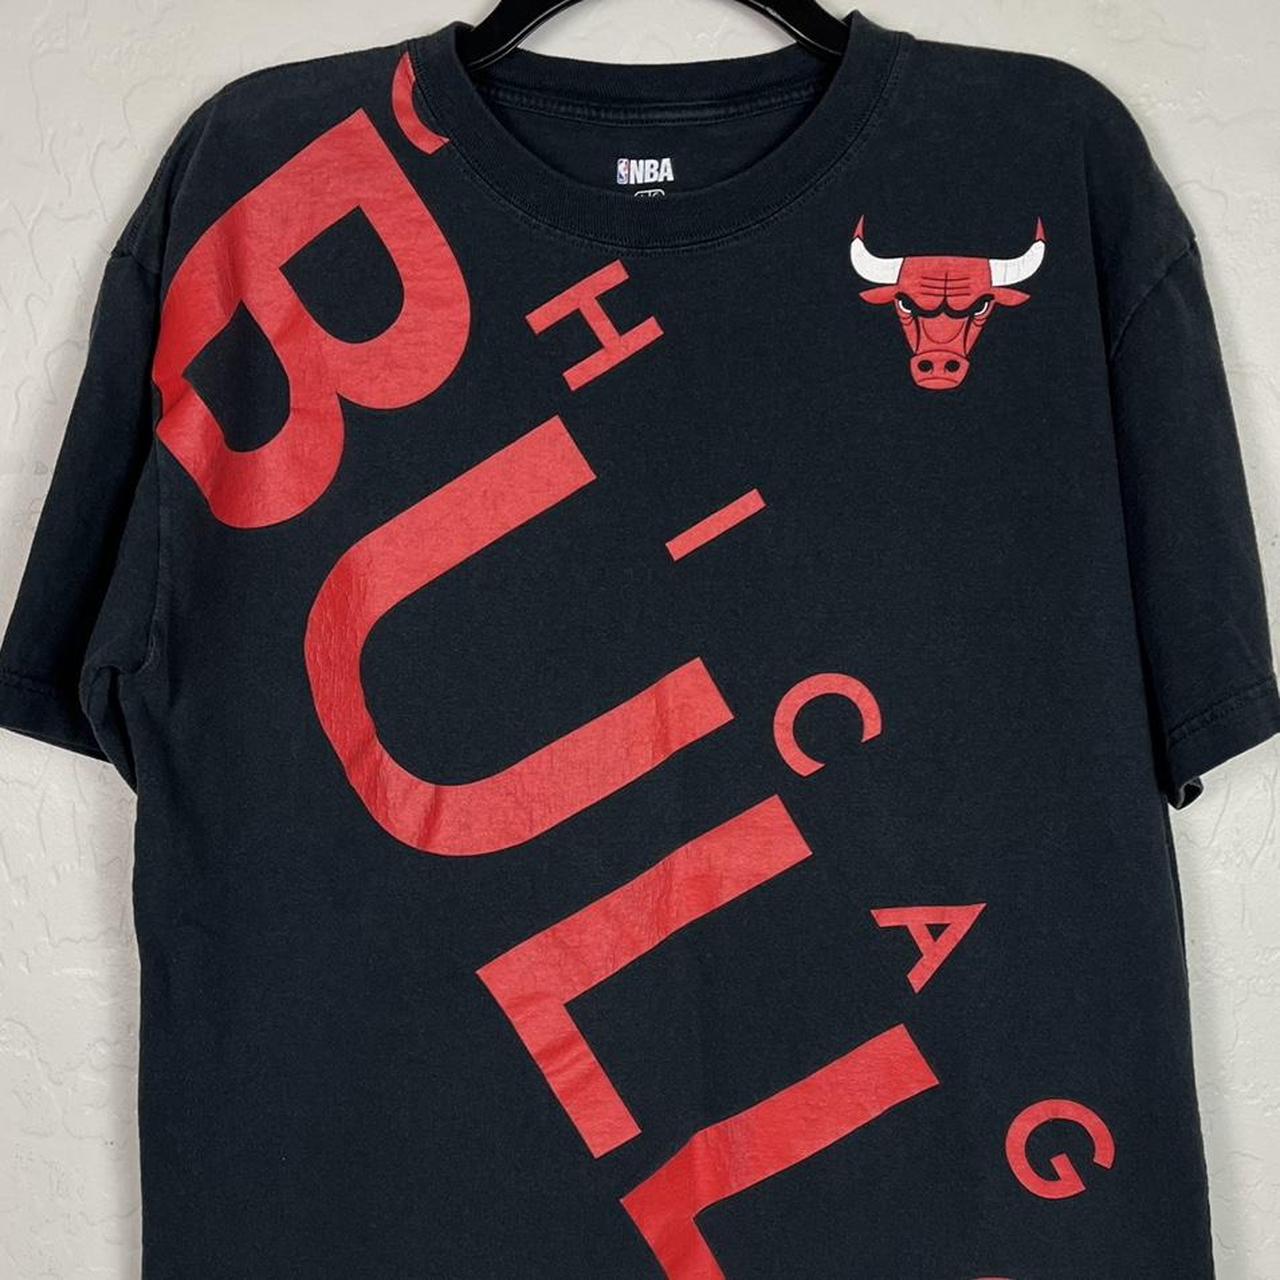 NBA Men's Black and Red T-shirt (2)